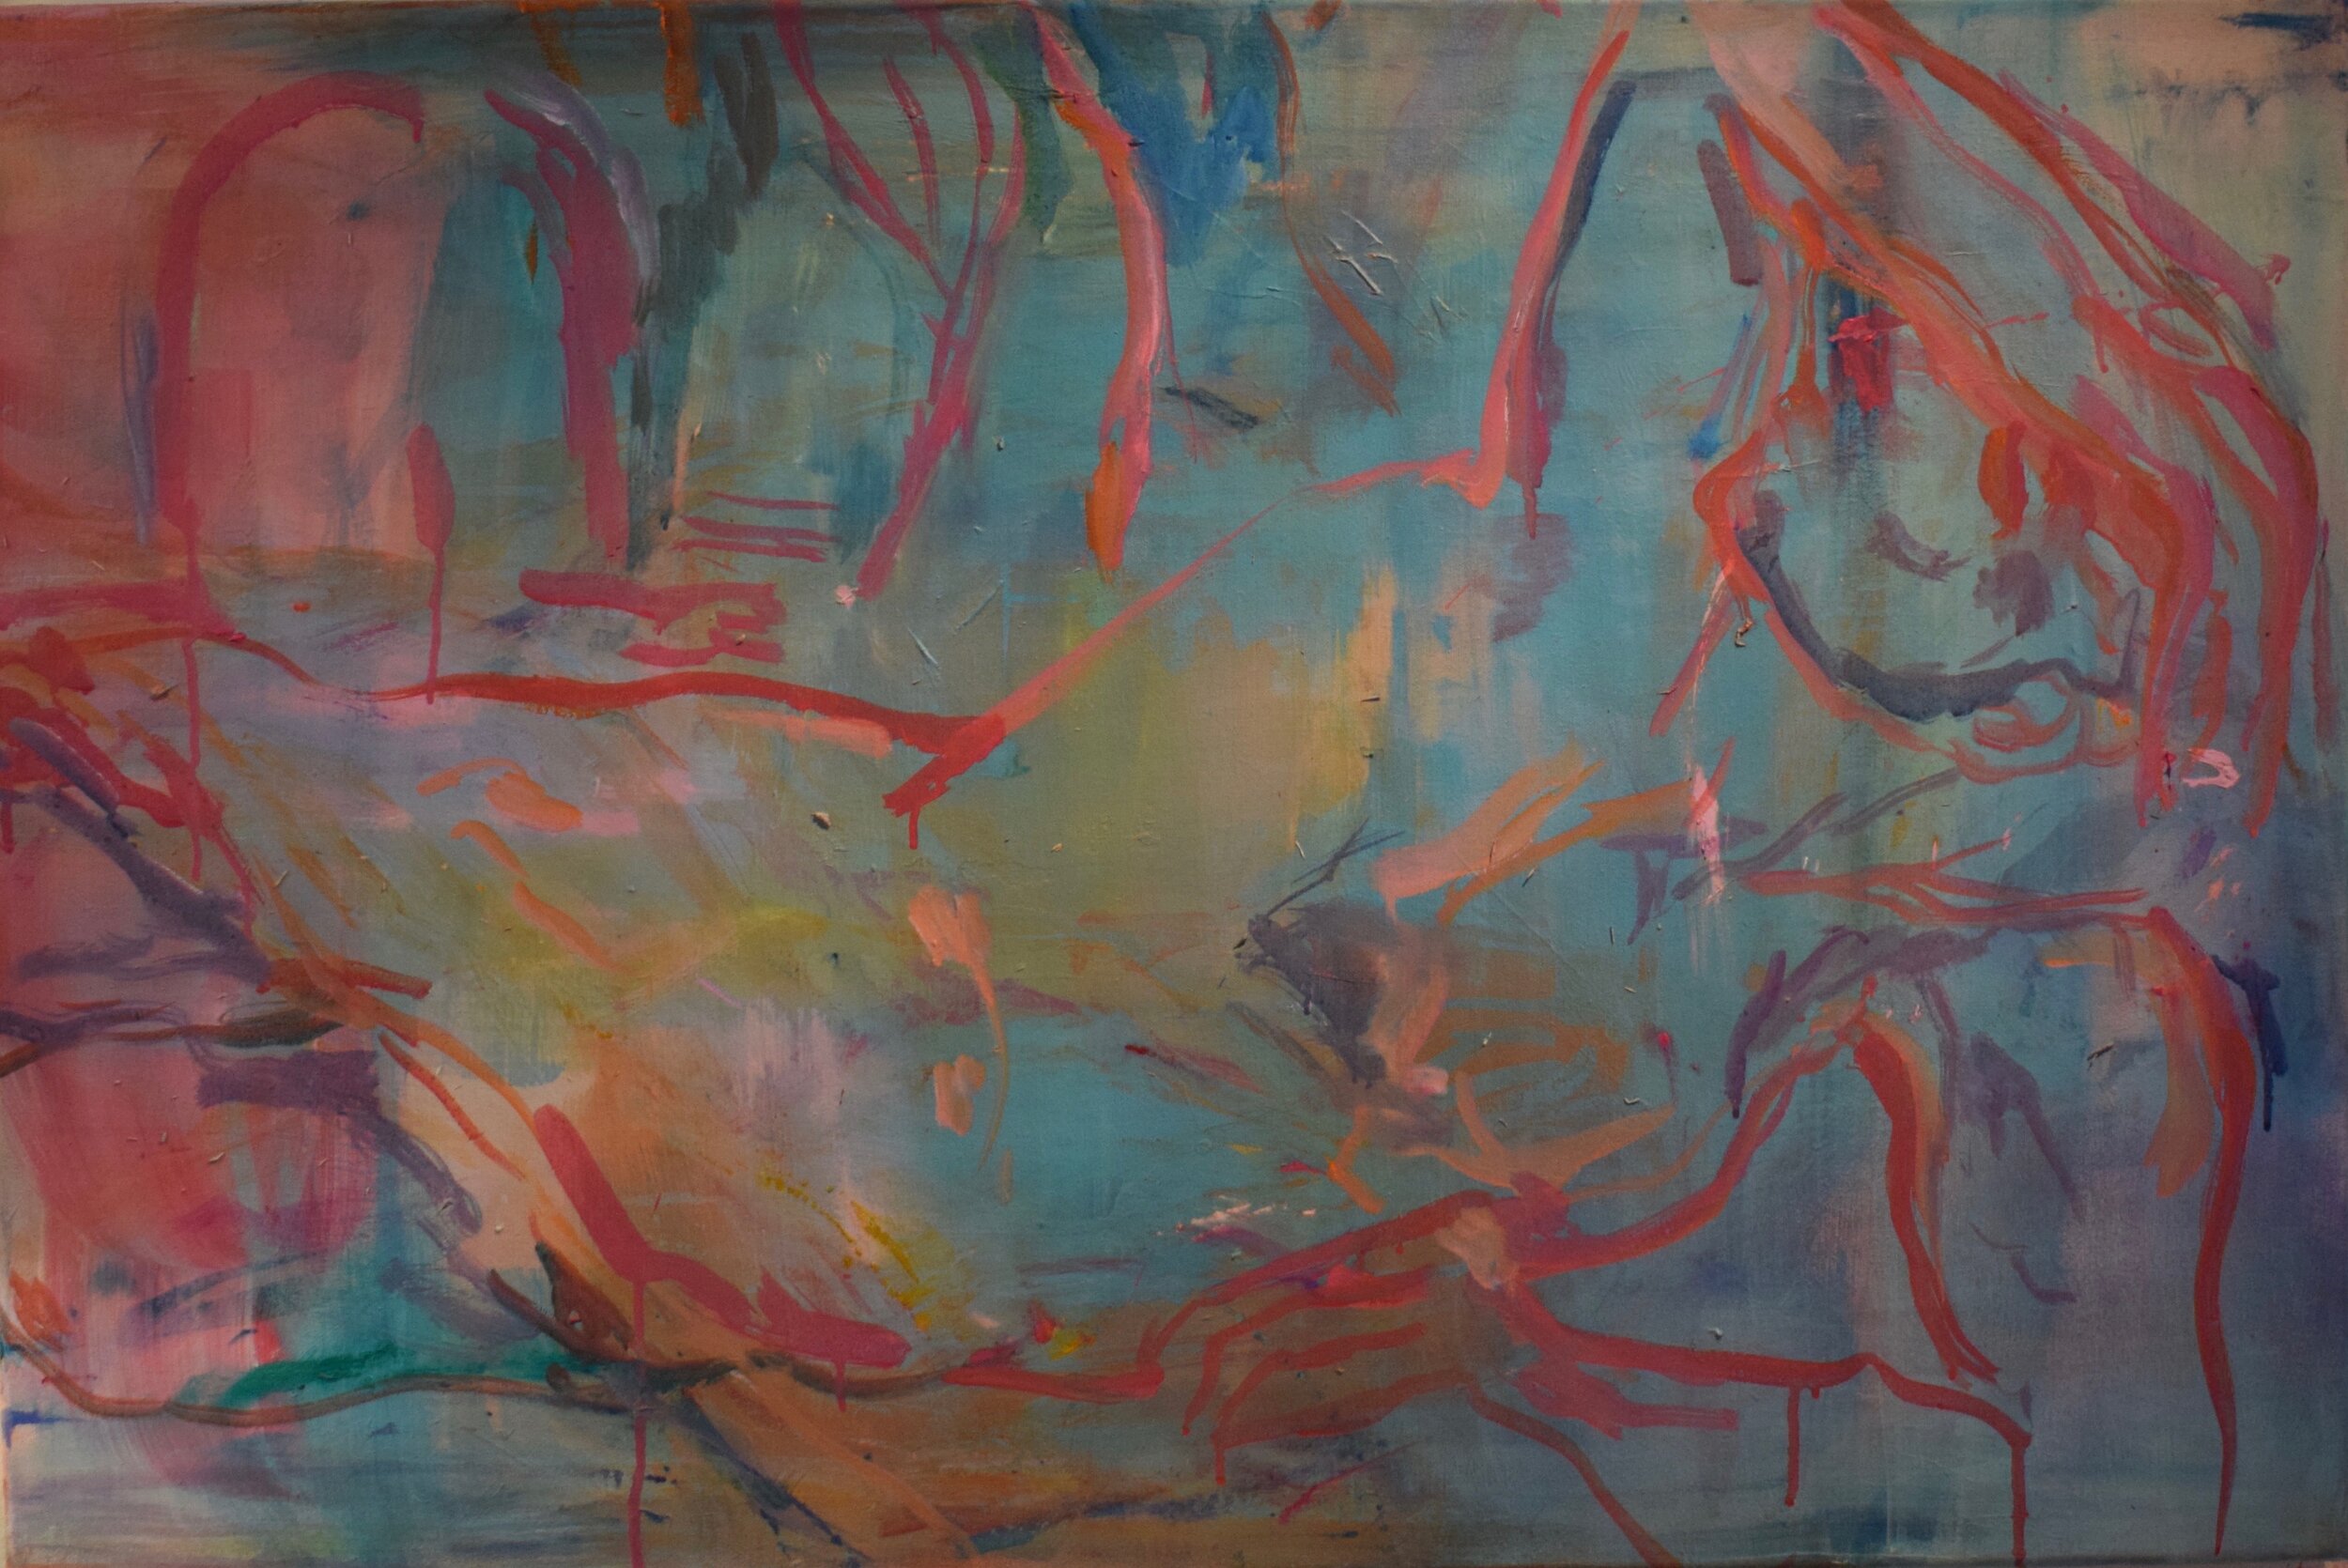 SOLD Cosmos of Life, 2021, oil on canvas, 60 x 90 cm